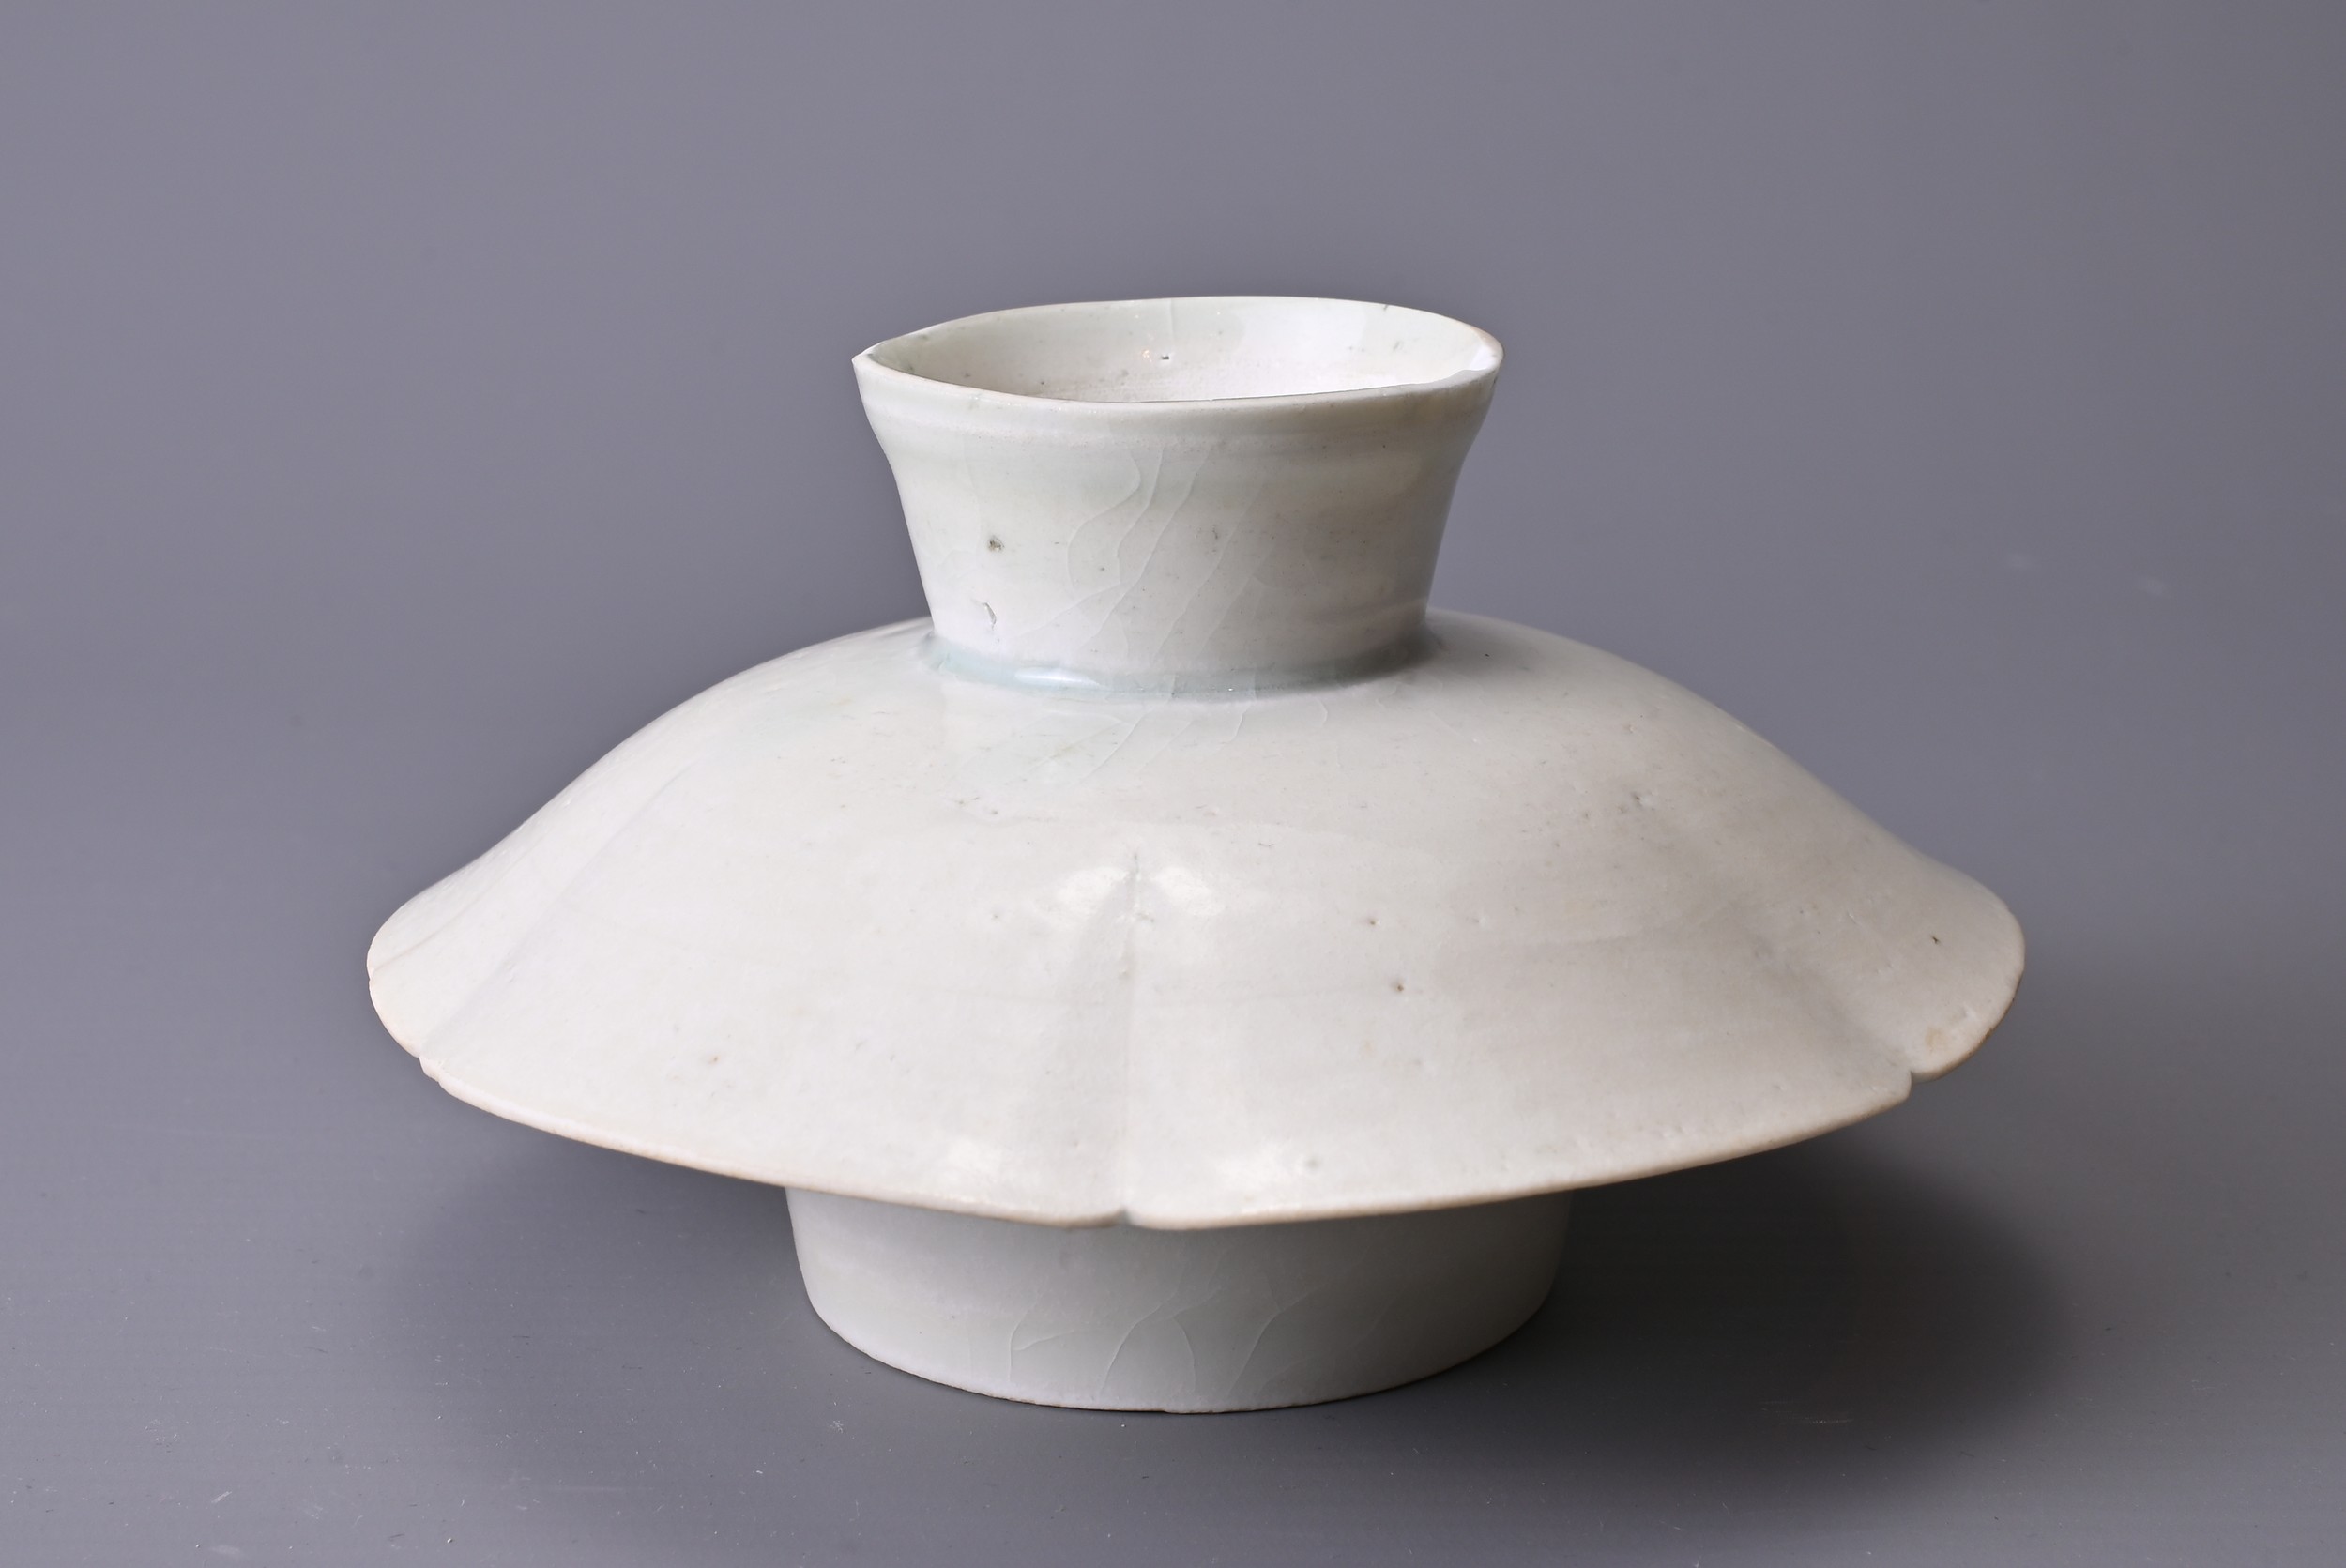 A CHINESE QINGBAI WARE CUP STAND, SONG DYNASTY (960-1279). A rounded cup top section attached to a - Image 6 of 6